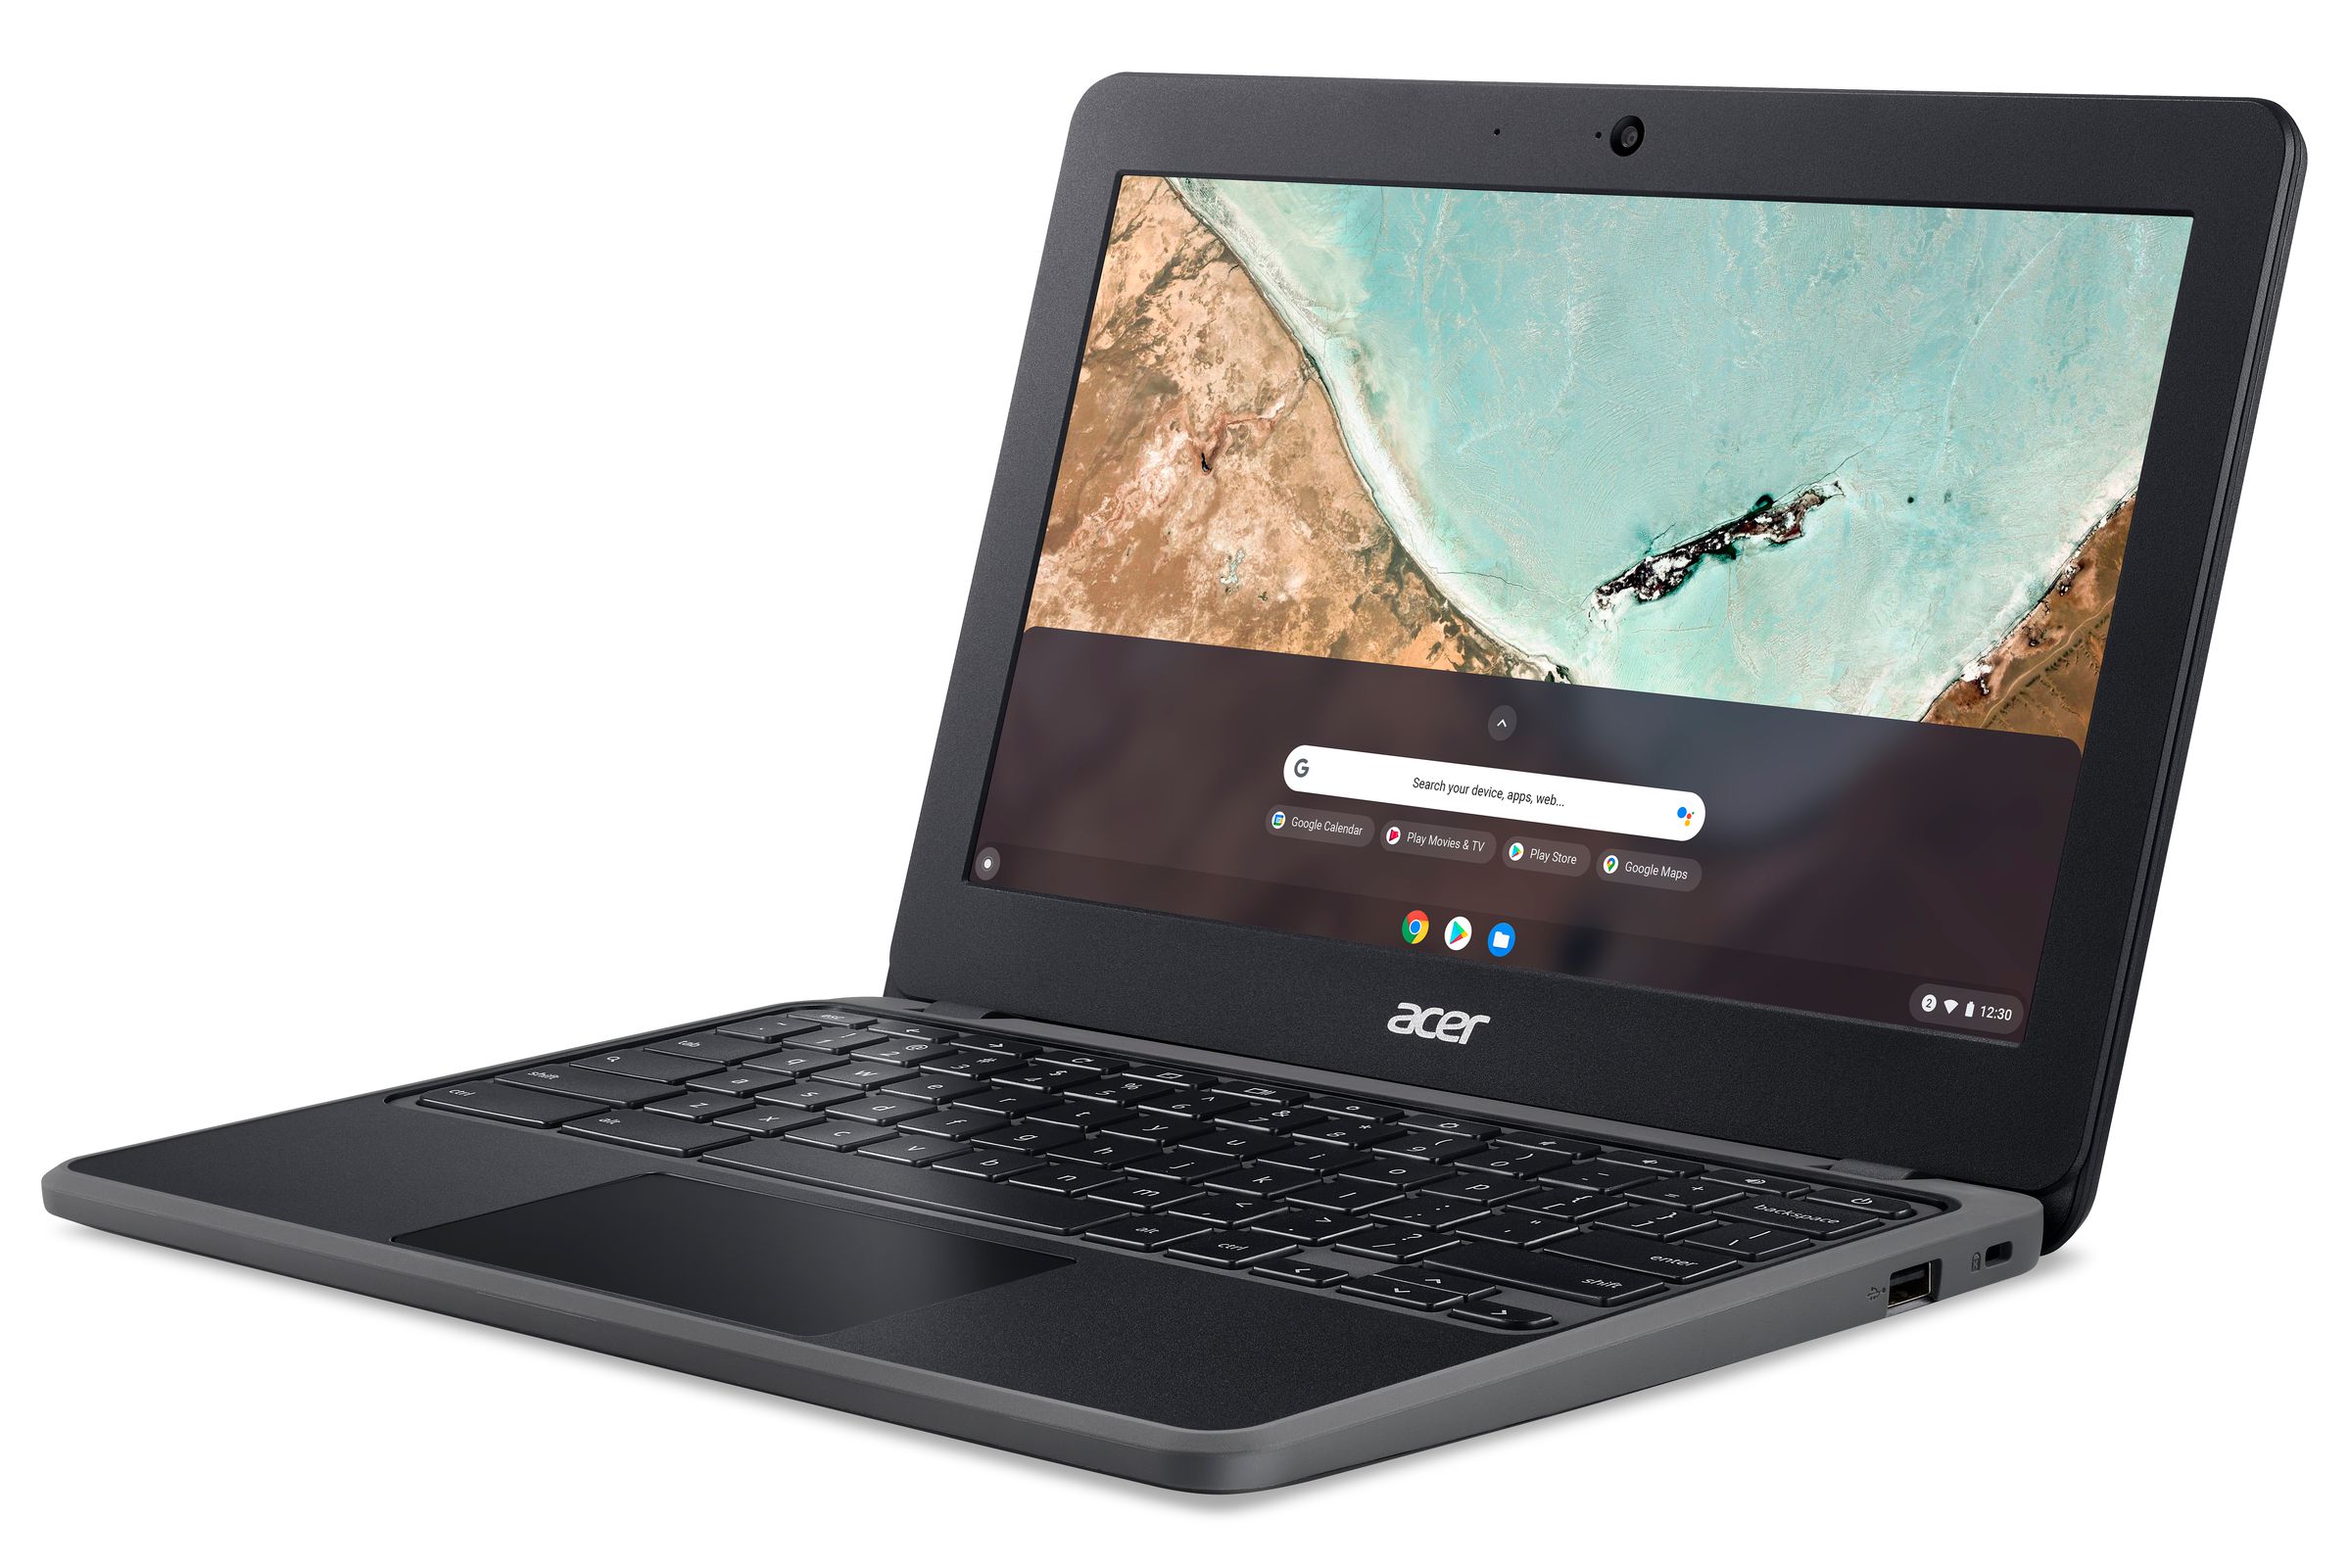 The Chromebook 311 is equipped with a Mediatek MT8183 processor.